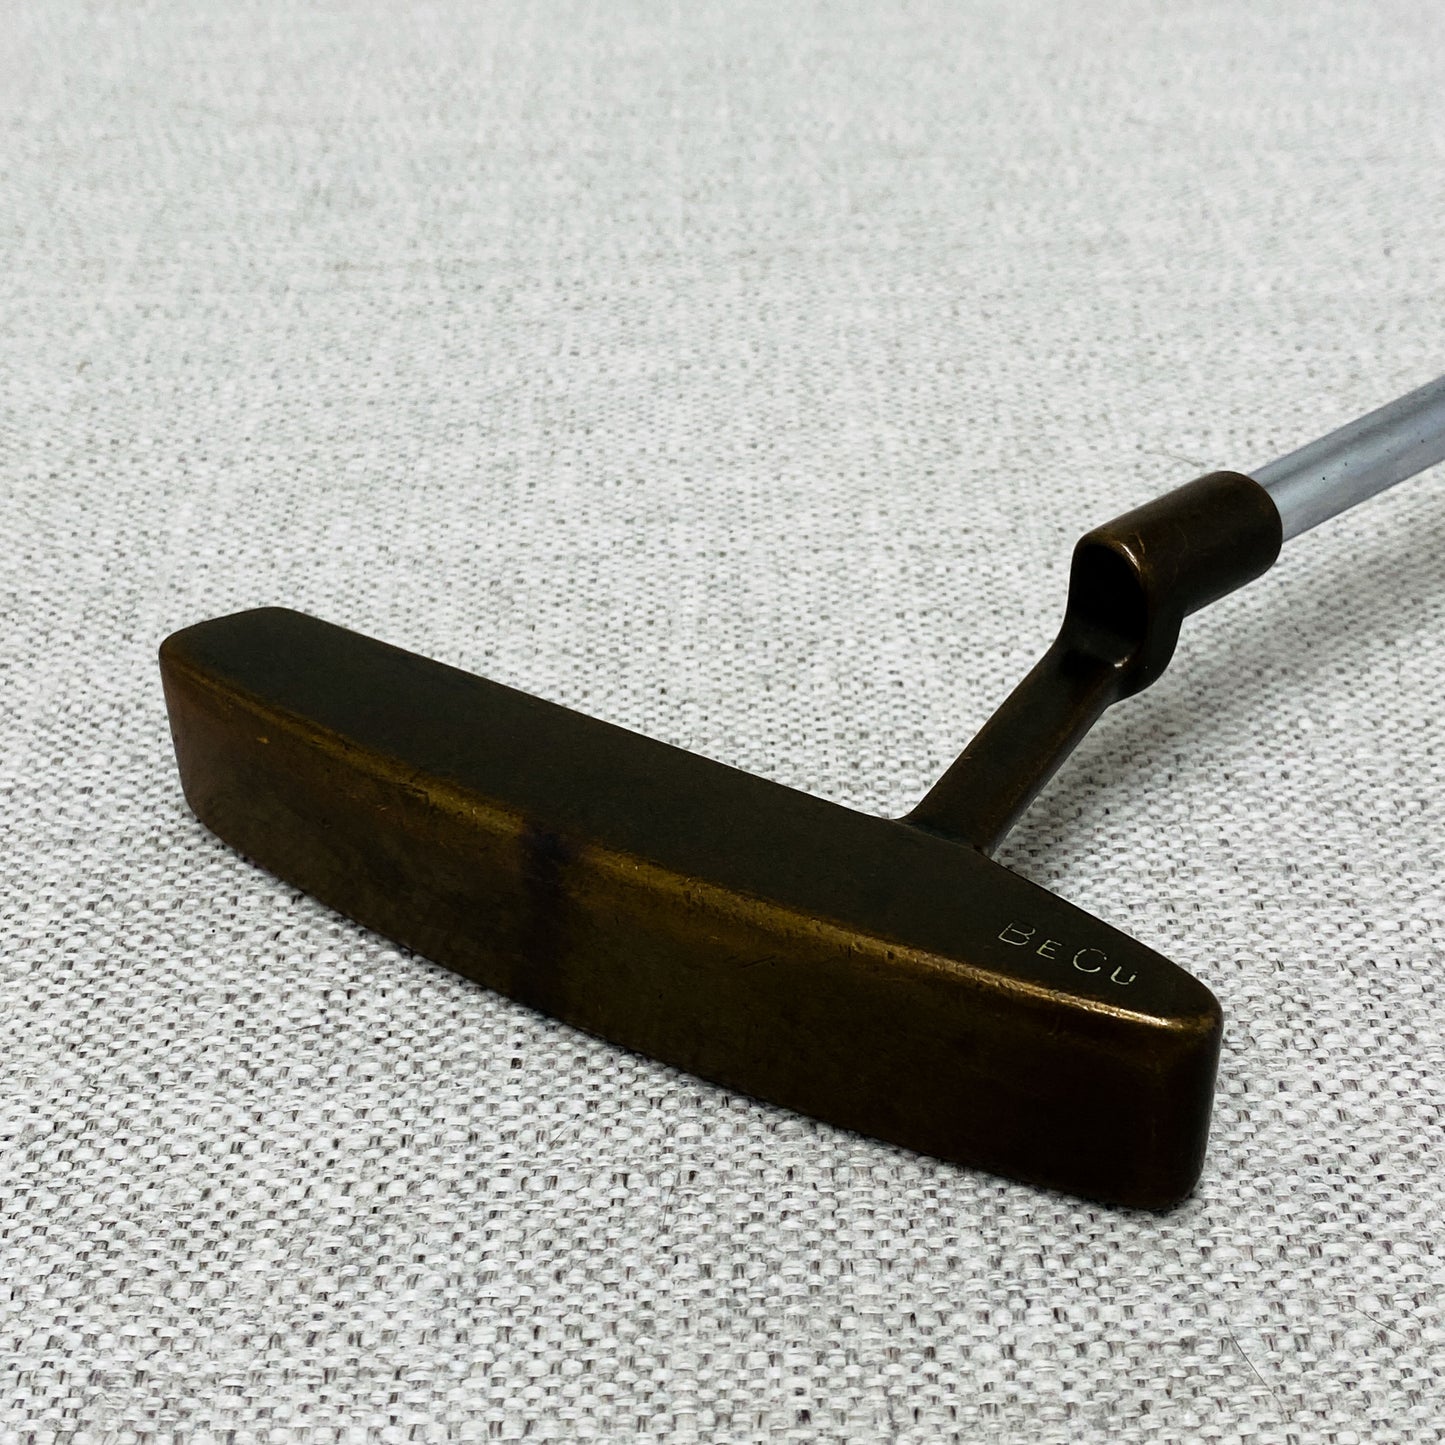 PING Pal 4 Beryllium Copper Putter. 36 inch - Very Good Condition # T1015